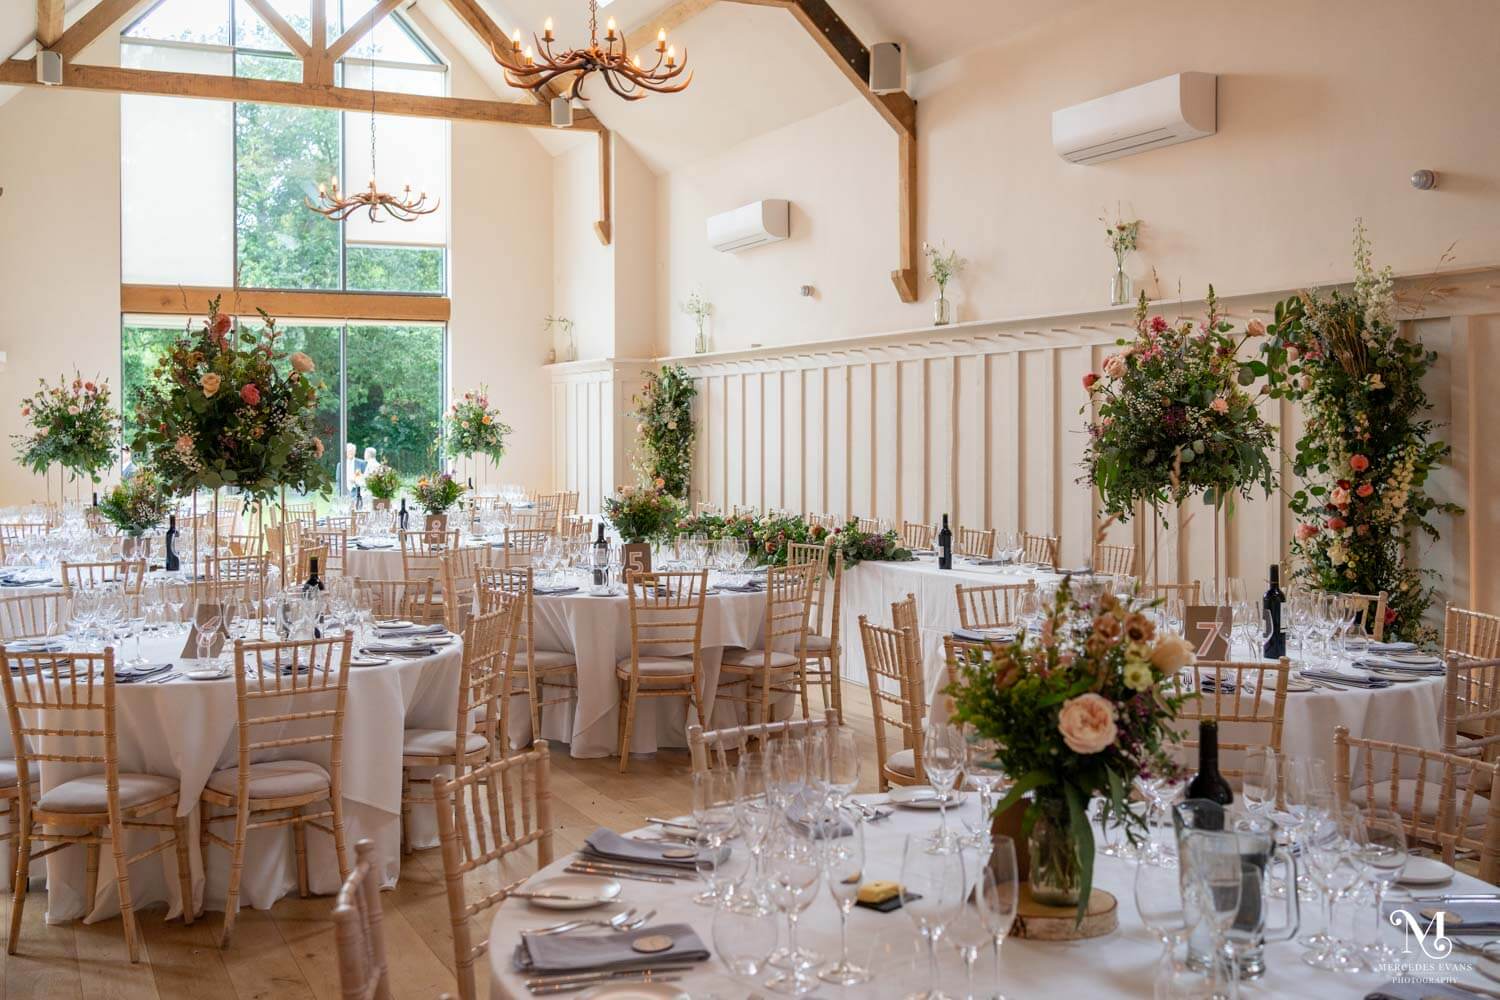 The larger of the two halls at millbridge court set ready for the wedding breakfast, there is a long trestle table by one wall and the room is filled round tables and chiavari chairs